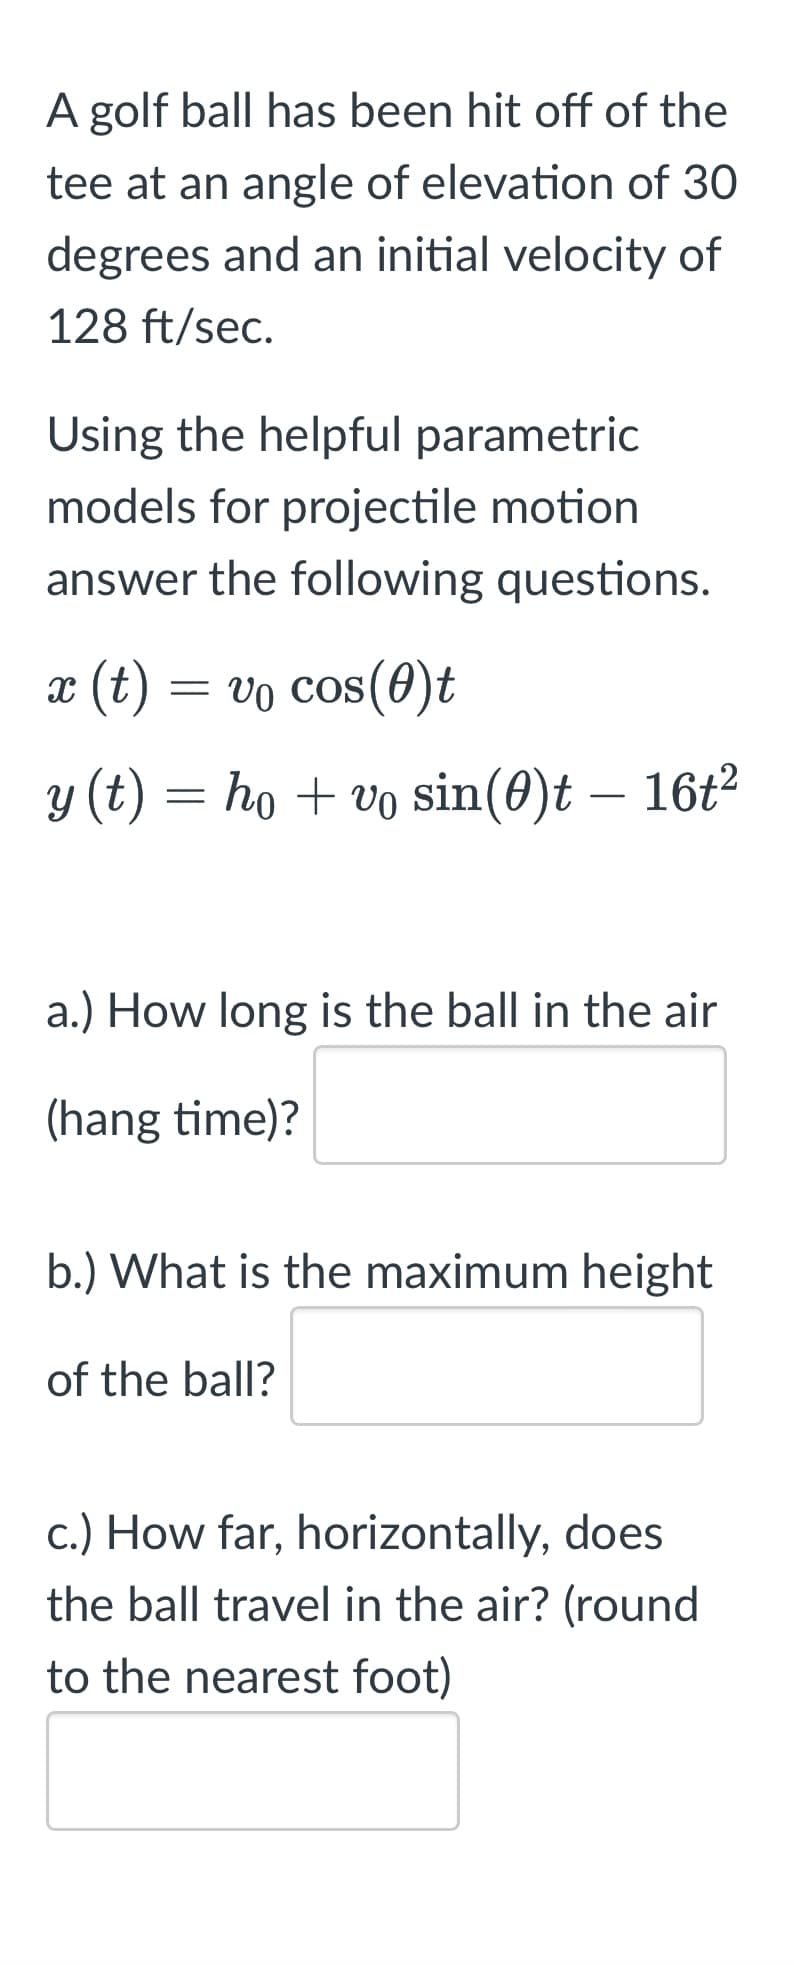 A golf ball has been hit off of the
tee at an angle of elevation of 30
degrees and an initial velocity of
128 ft/sec.
Using the helpful parametric
models for projectile motion
answer the following questions.
x (t) = vo cos(0)t
y (t) = hovo sin(0)t - 16t²
a.) How long is the ball in the air
(hang time)?
b.) What is the maximum height
of the ball?
c.) How far, horizontally, does
the ball travel in the air? (round
to the nearest foot)